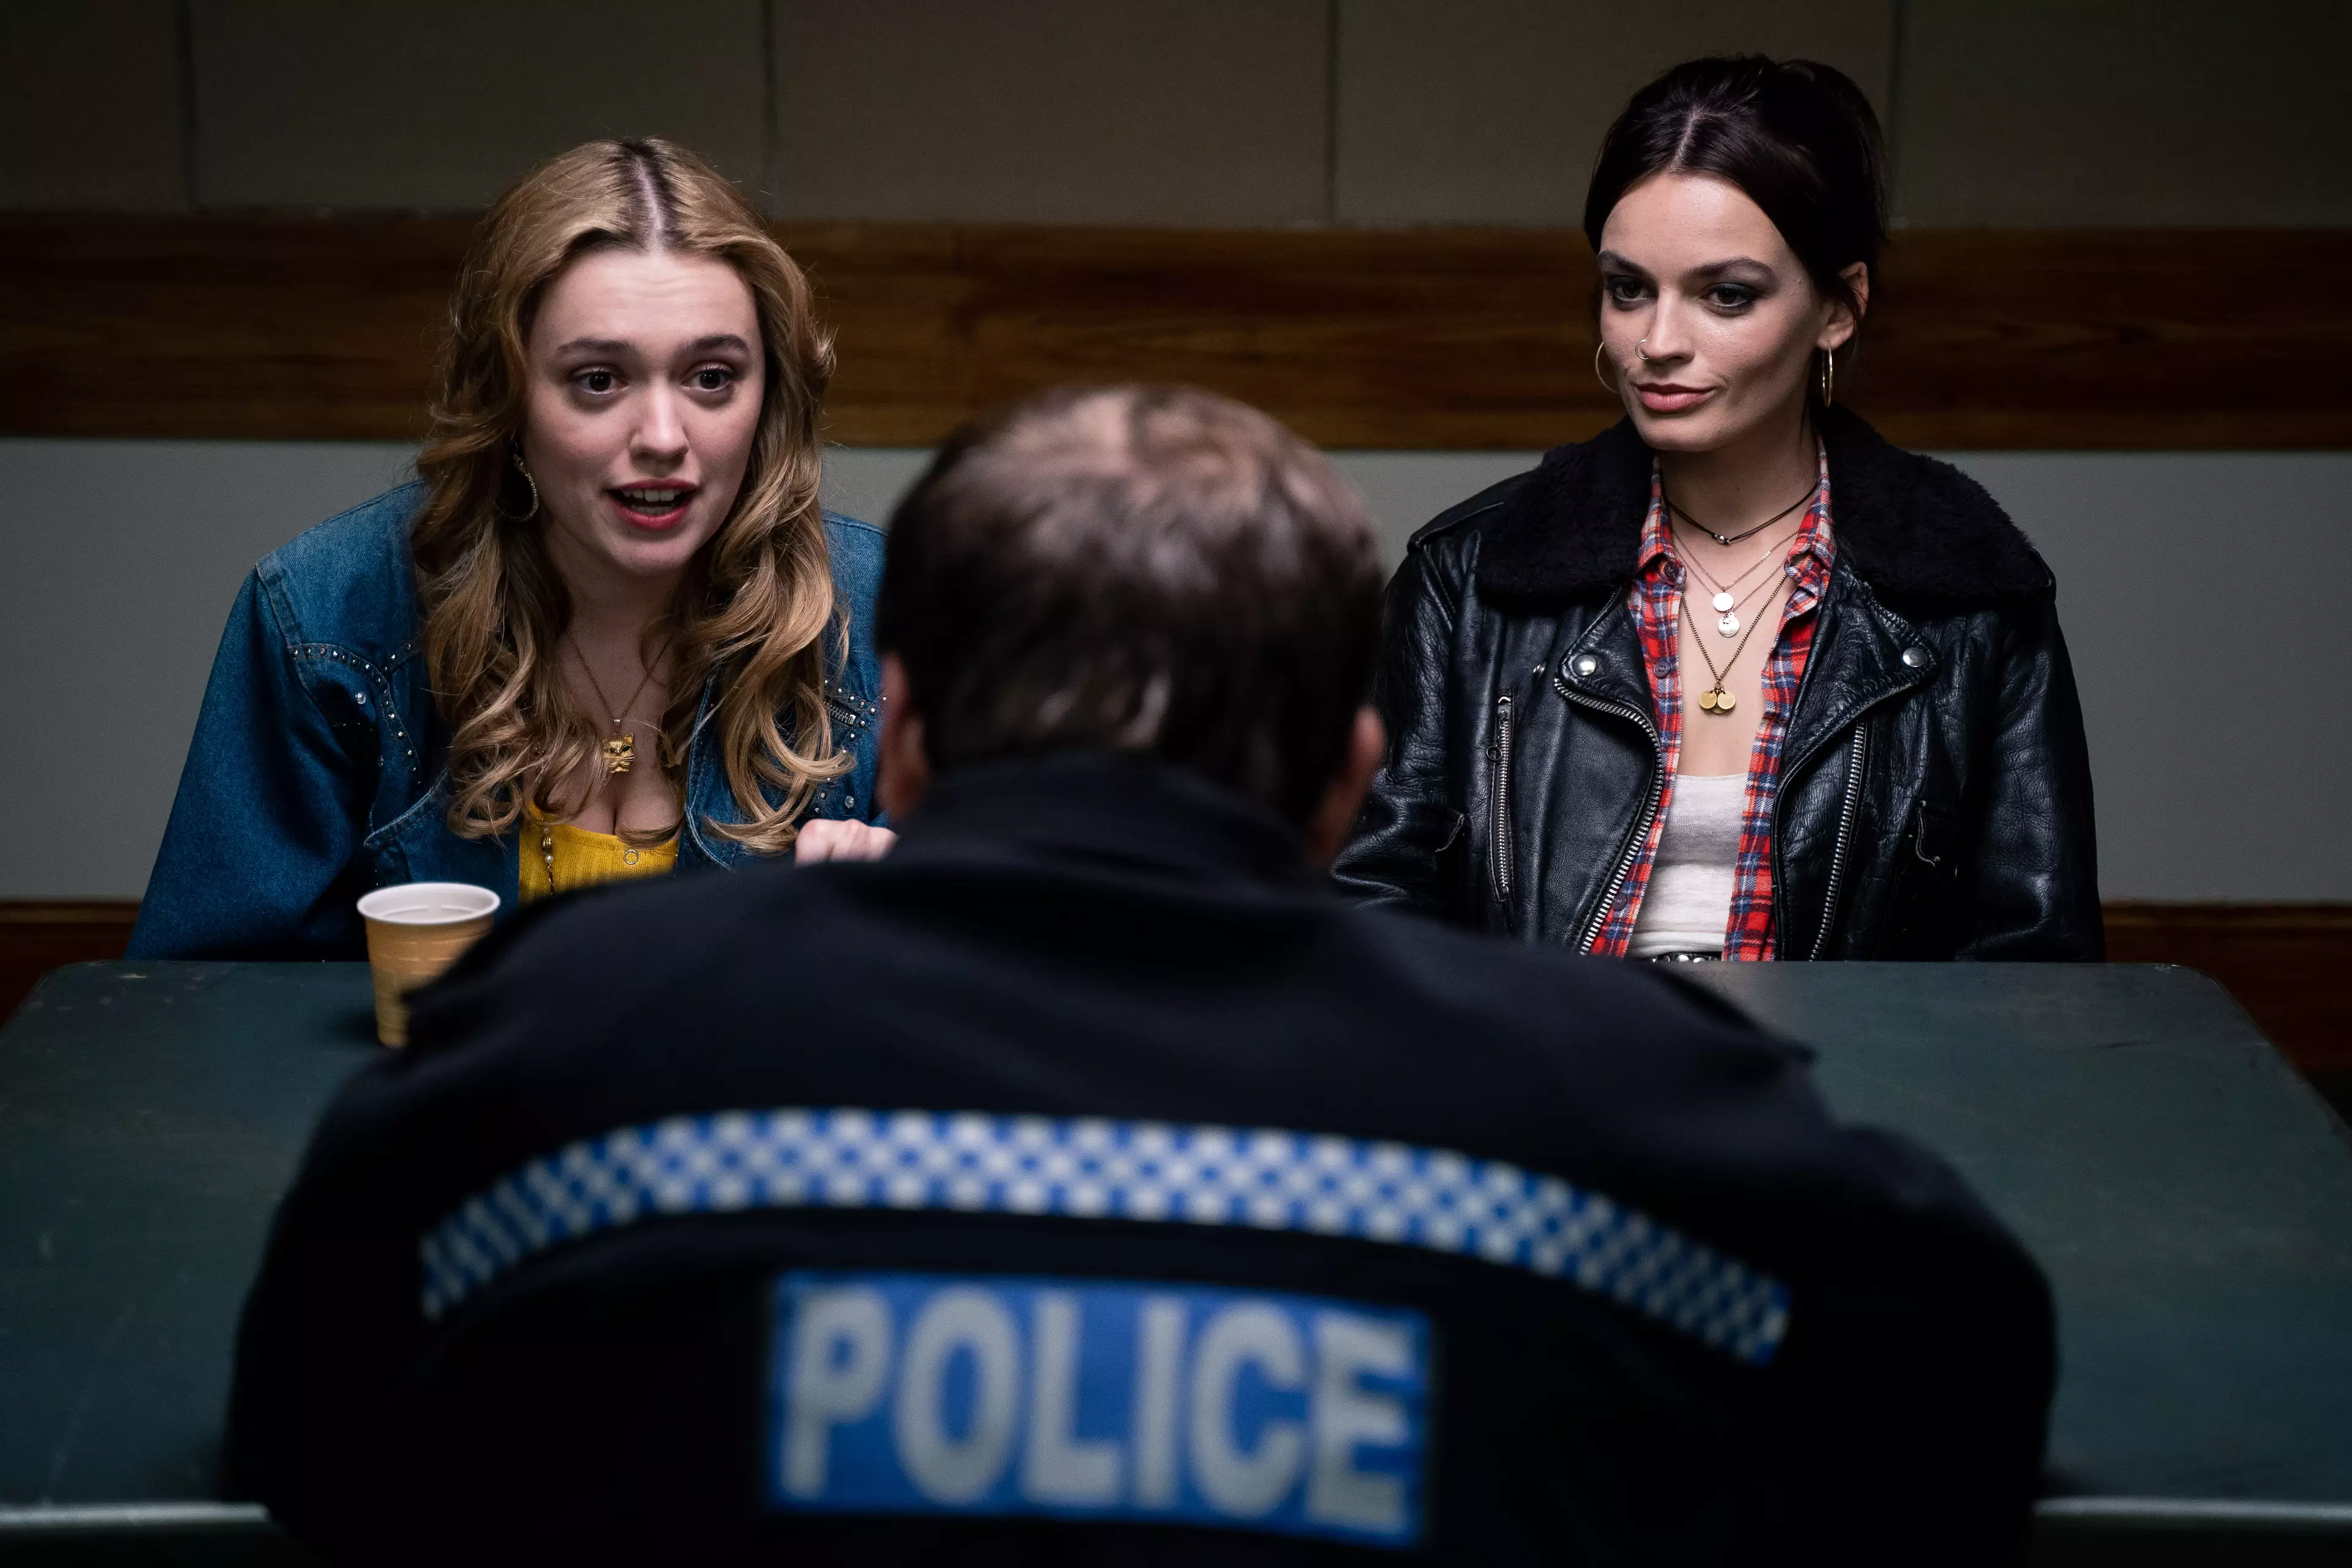 Aimee and Maeve are set to become even closer friends in Season 2 now that Aimee has ditched awful friends 'The Untouchables'. (